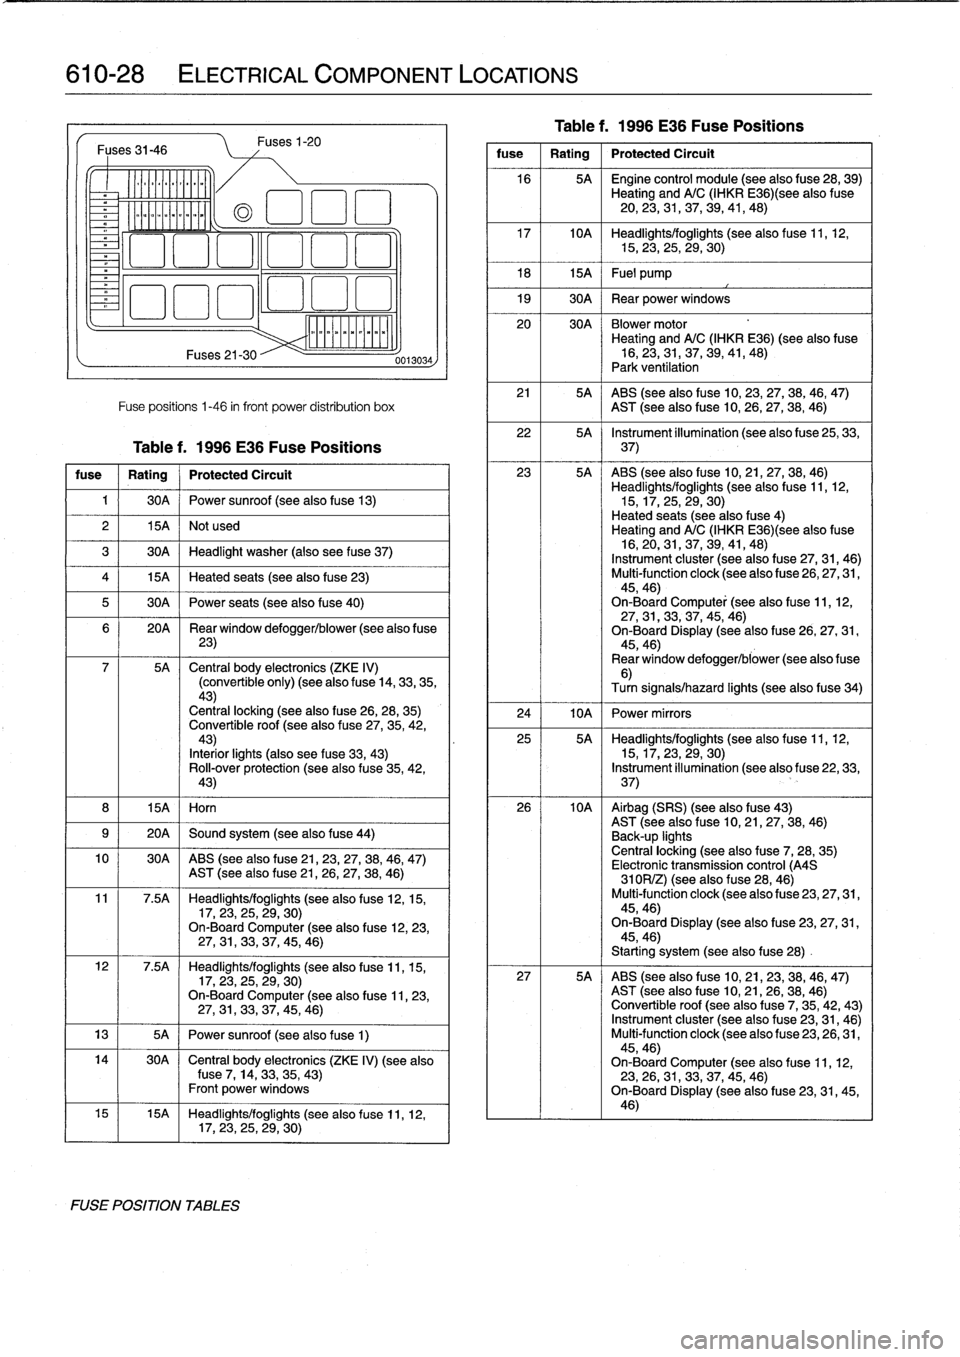 BMW 323i 1998 E36 User Guide 
610-28

	

ELECTRICAL
COMPONENT
LOCATIONS

Fuses
31-46

k
Lírcoo)]
LE

7a
Maz

Fuses
21-30

Fuse
positions
1-46
in
front
power
distribution
box
Table
f
.
1996
E36
Fuse
Positions

fuse

	

Rating

	
